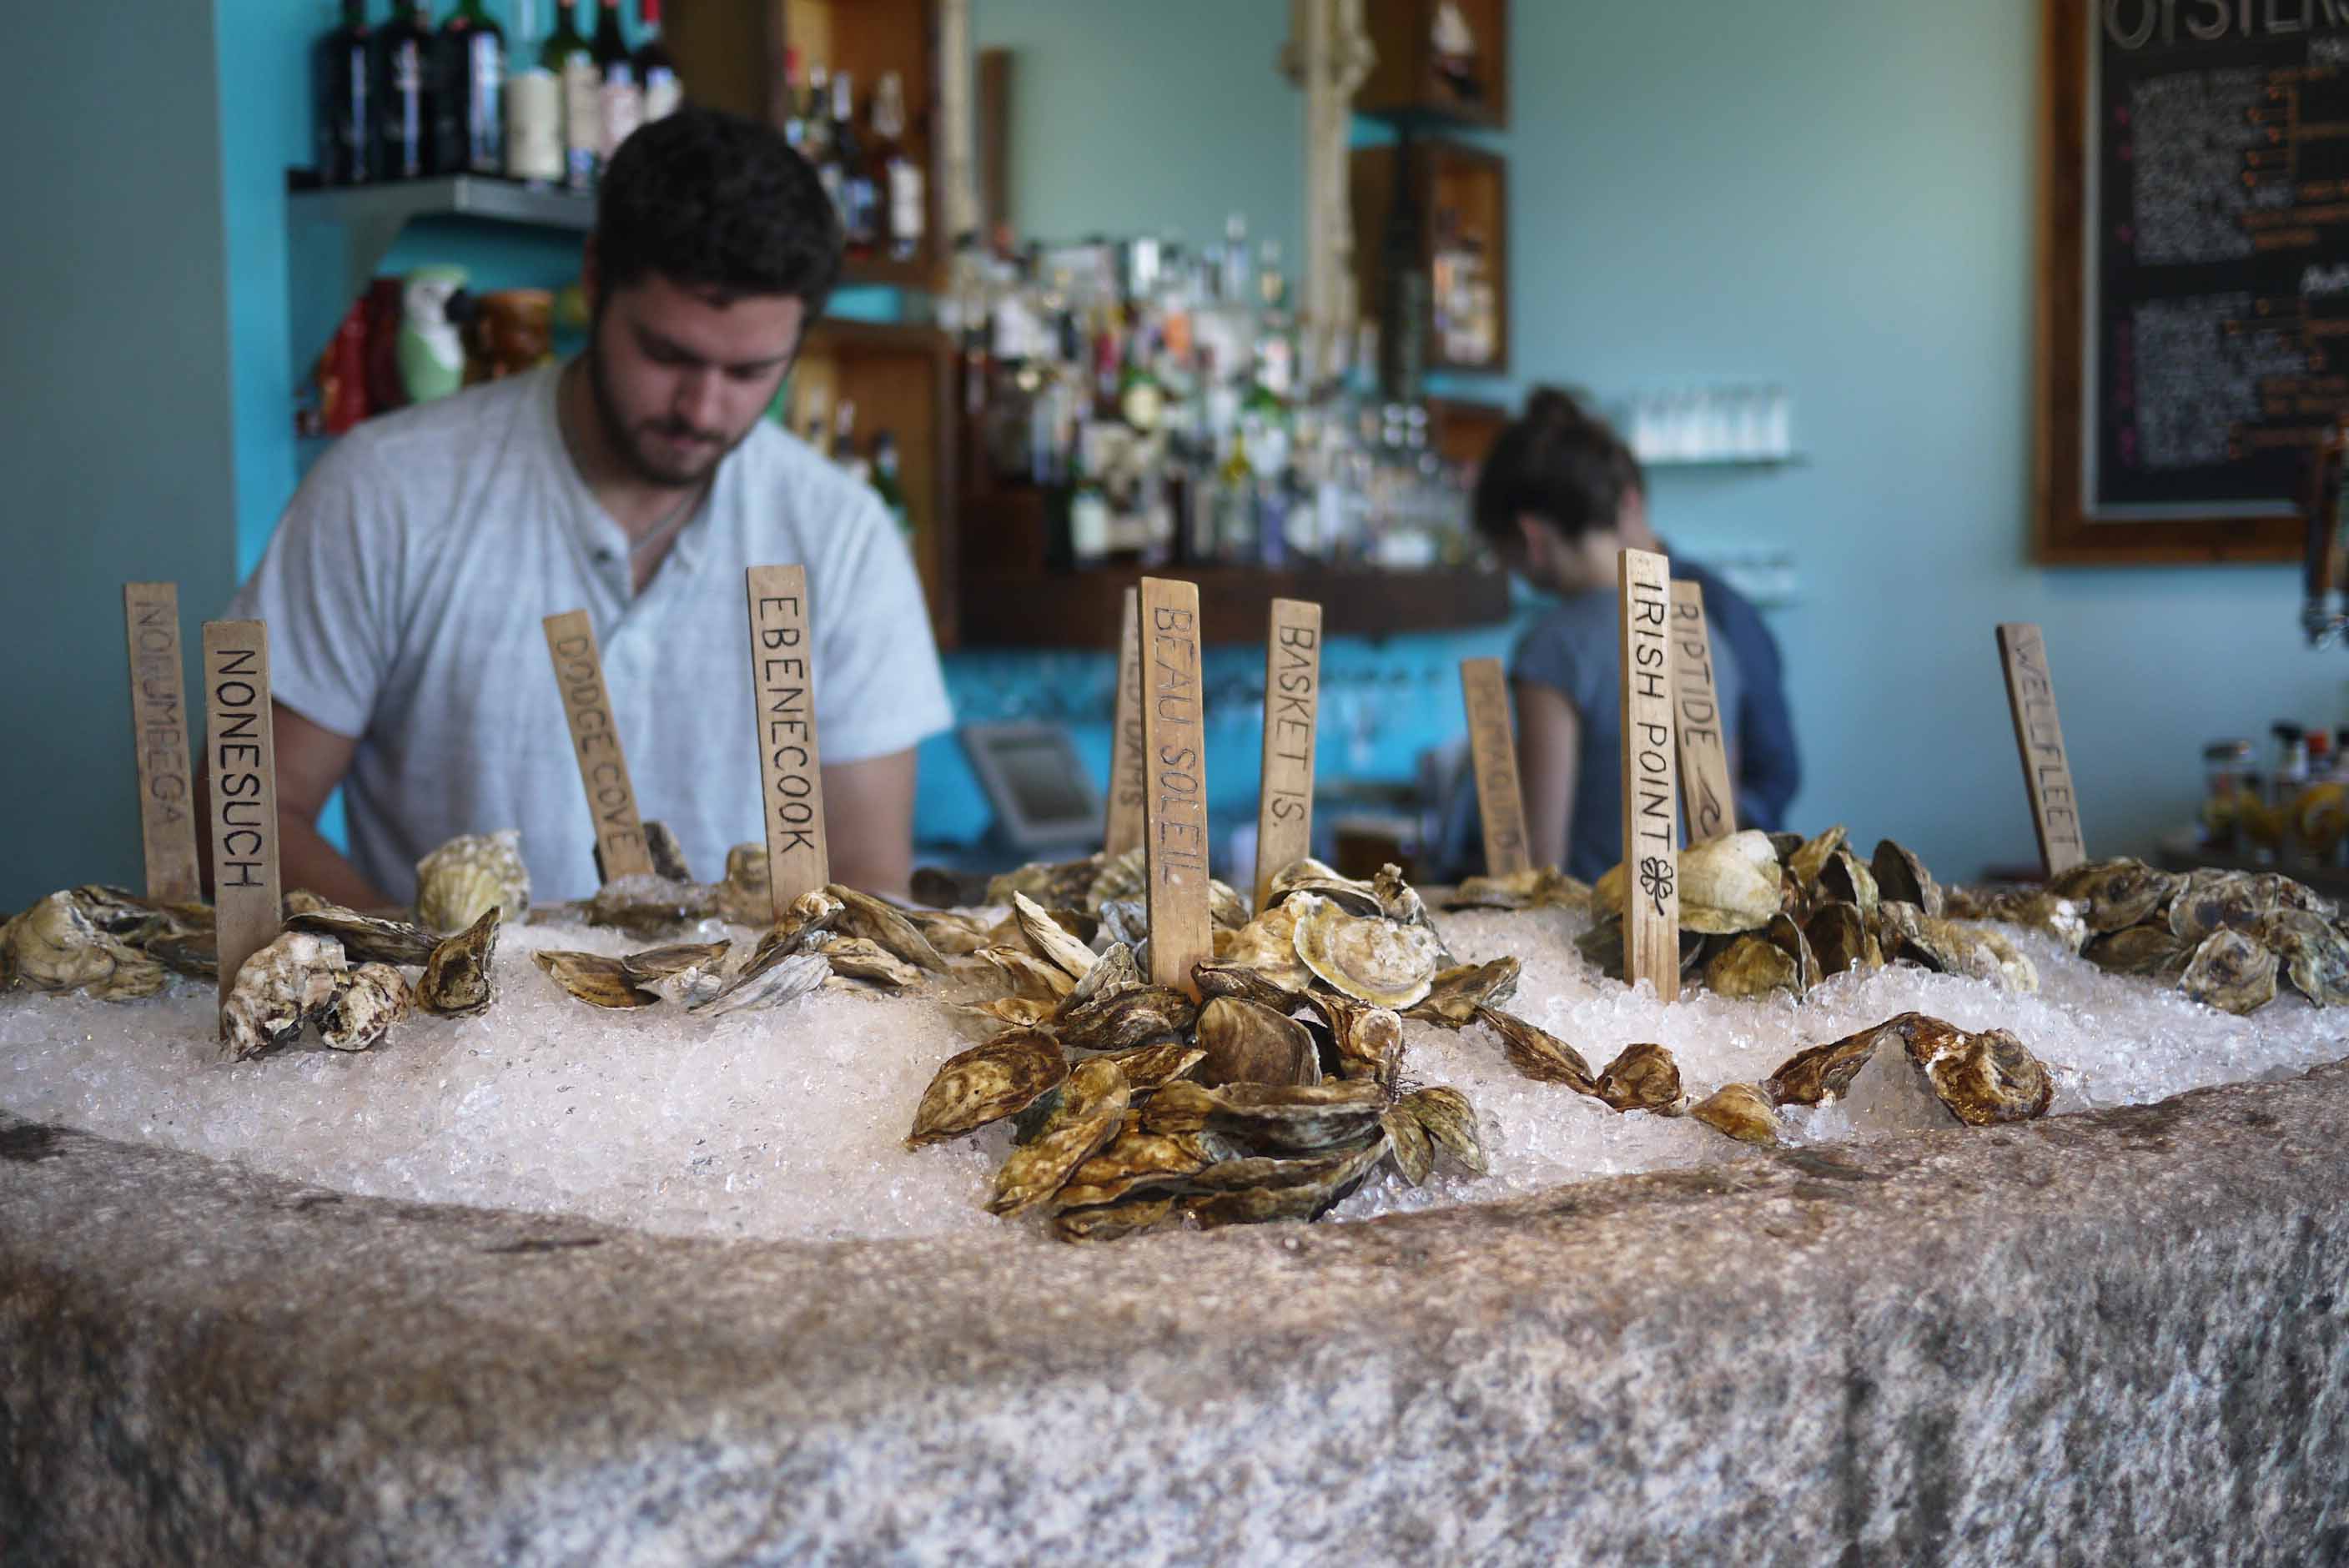 Eventide Oyster Co Review, Portland ME - The Buggy Blog